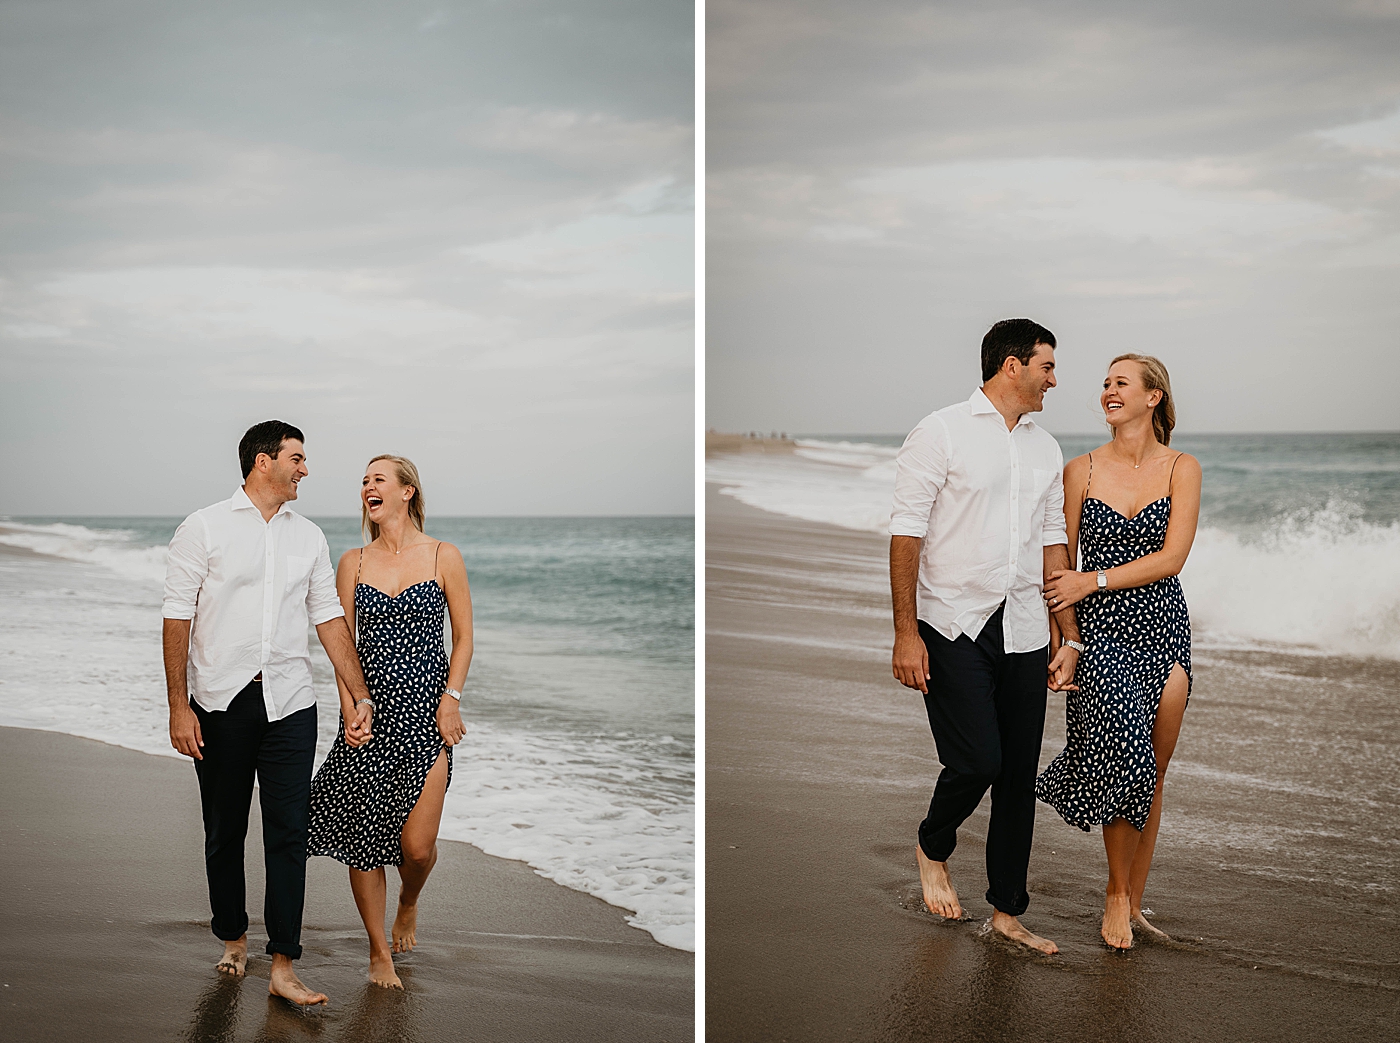 Couple walking with arms intertwined on wet sand as waves come in Palm Beach Engagement Photography captured by South Florida Engagement Photographer Krystal Capone Photography 